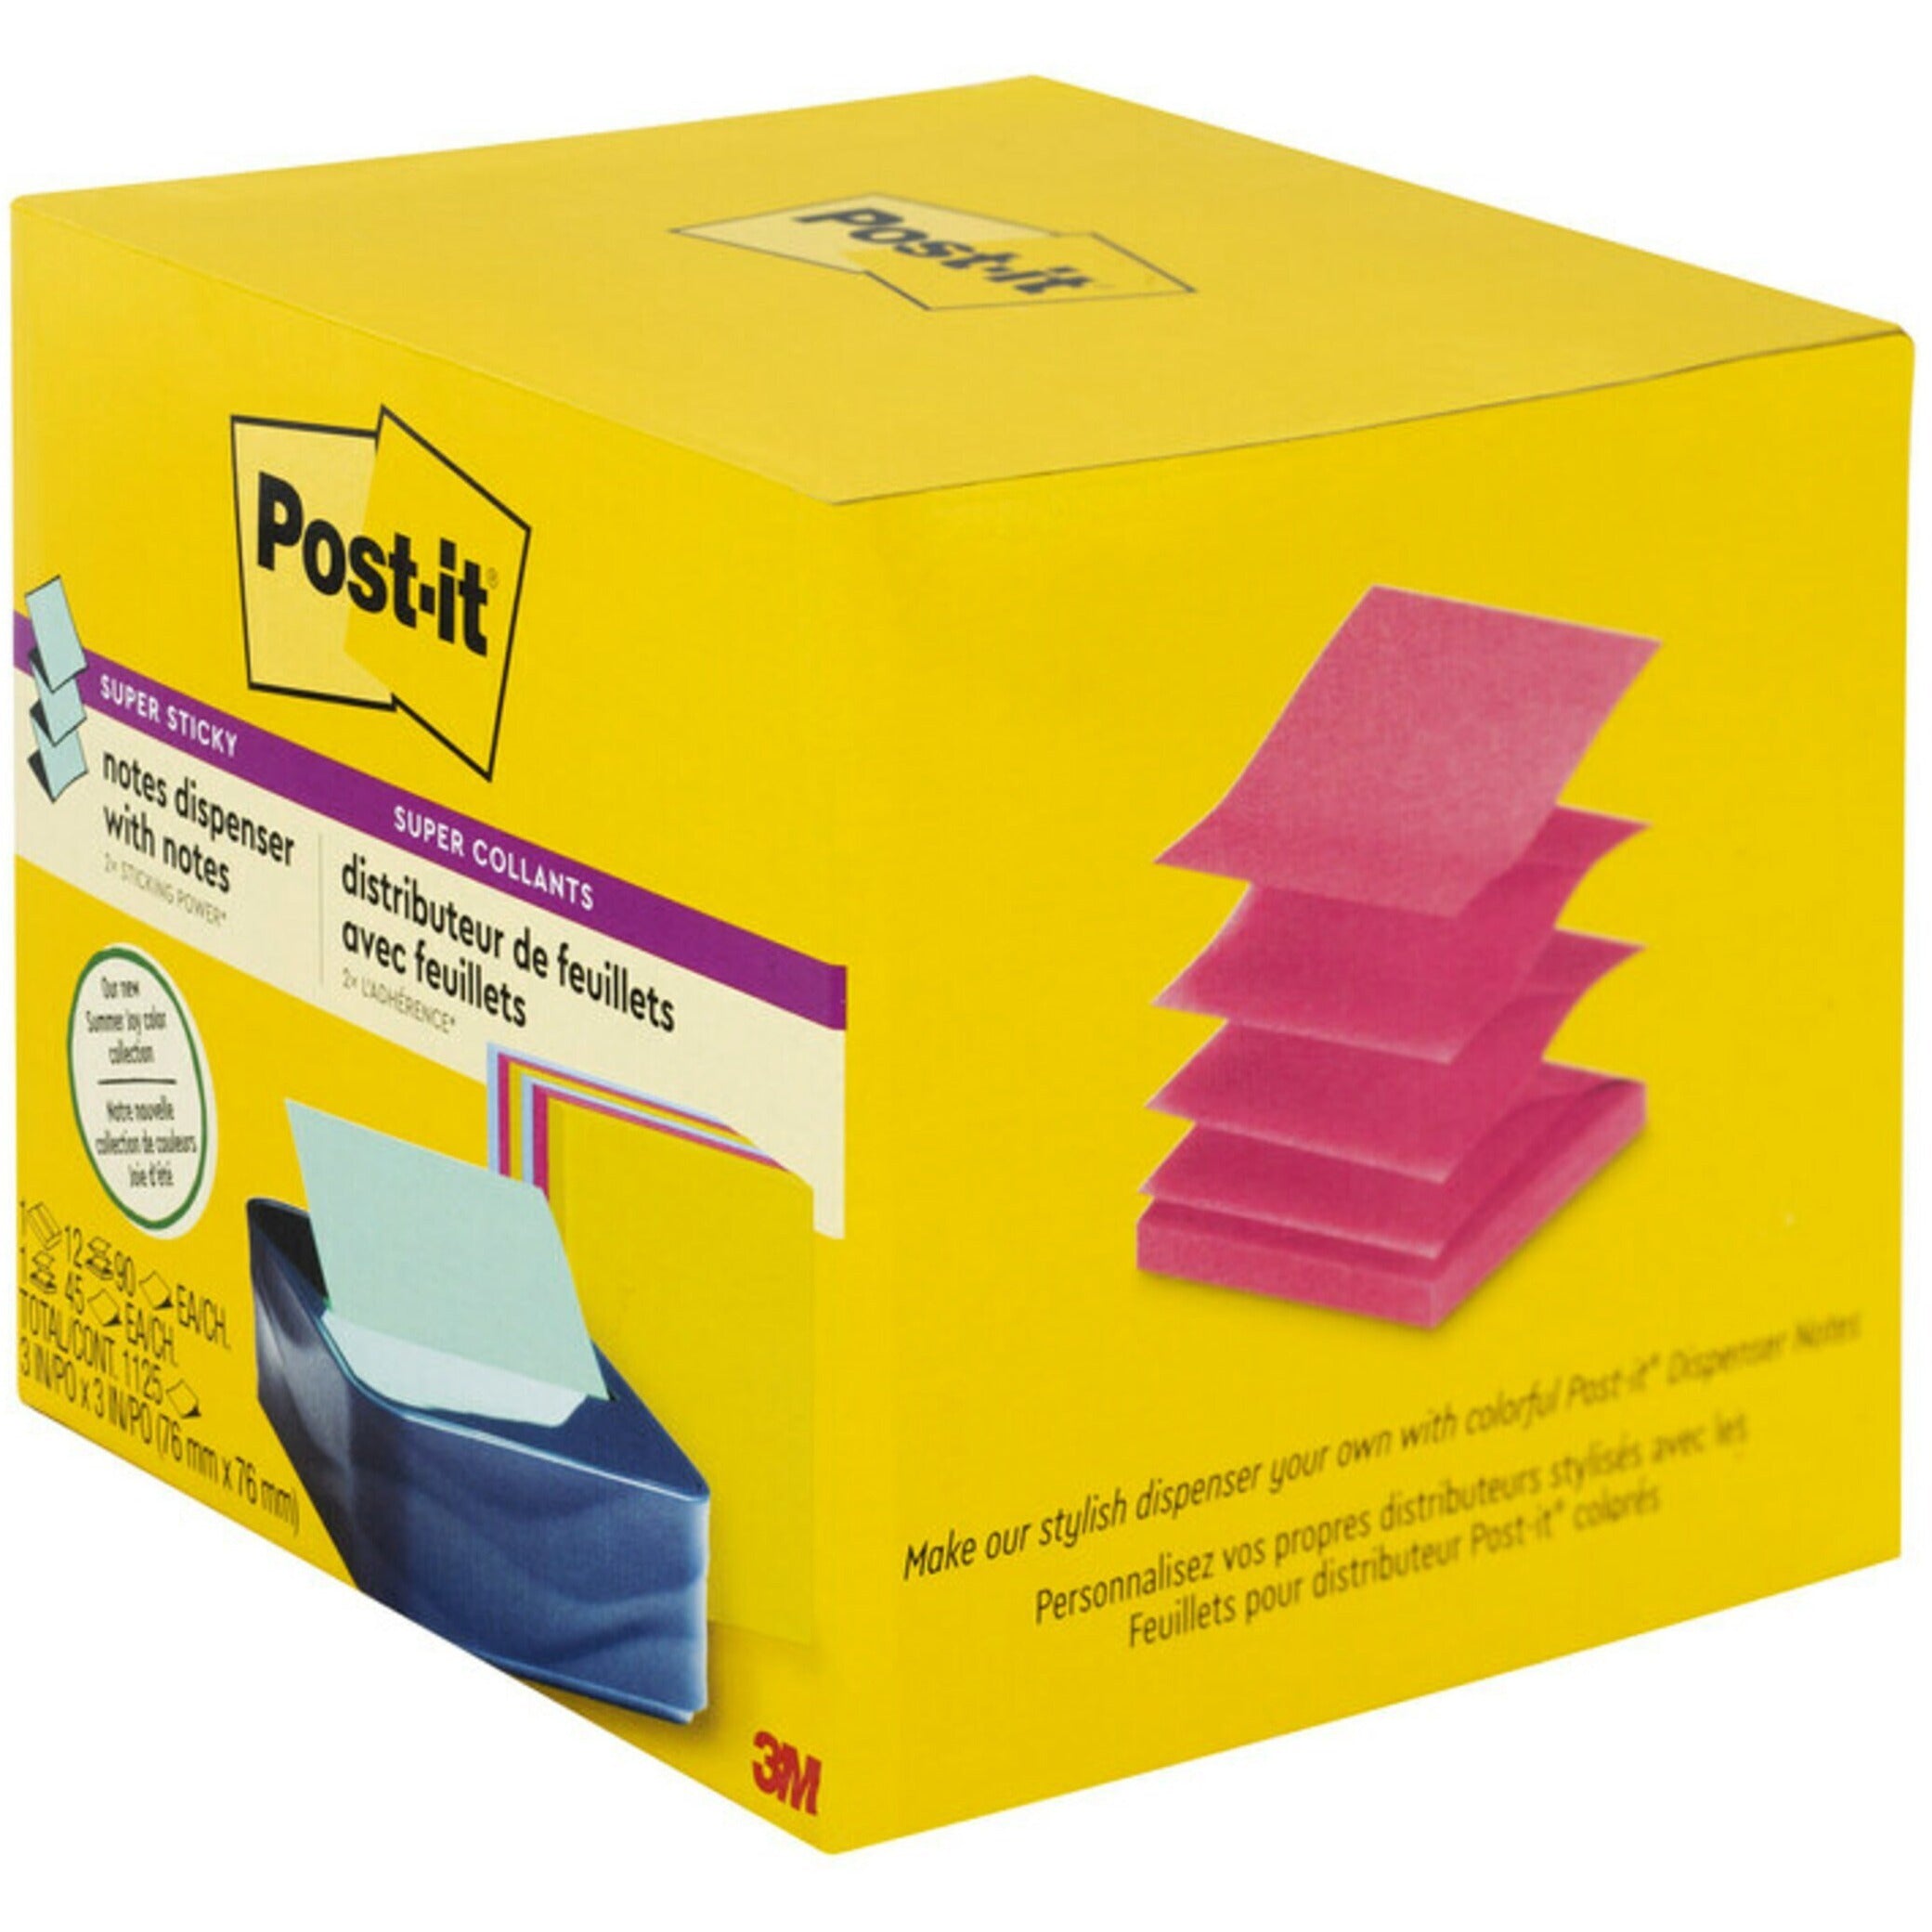 post-it-notes-dispenser-and-dispenser-notes-3-x-3-note-90-sheet-note-capacity-washed-denim-citron-yellow-power-pink_mmmwave330ssva - 3